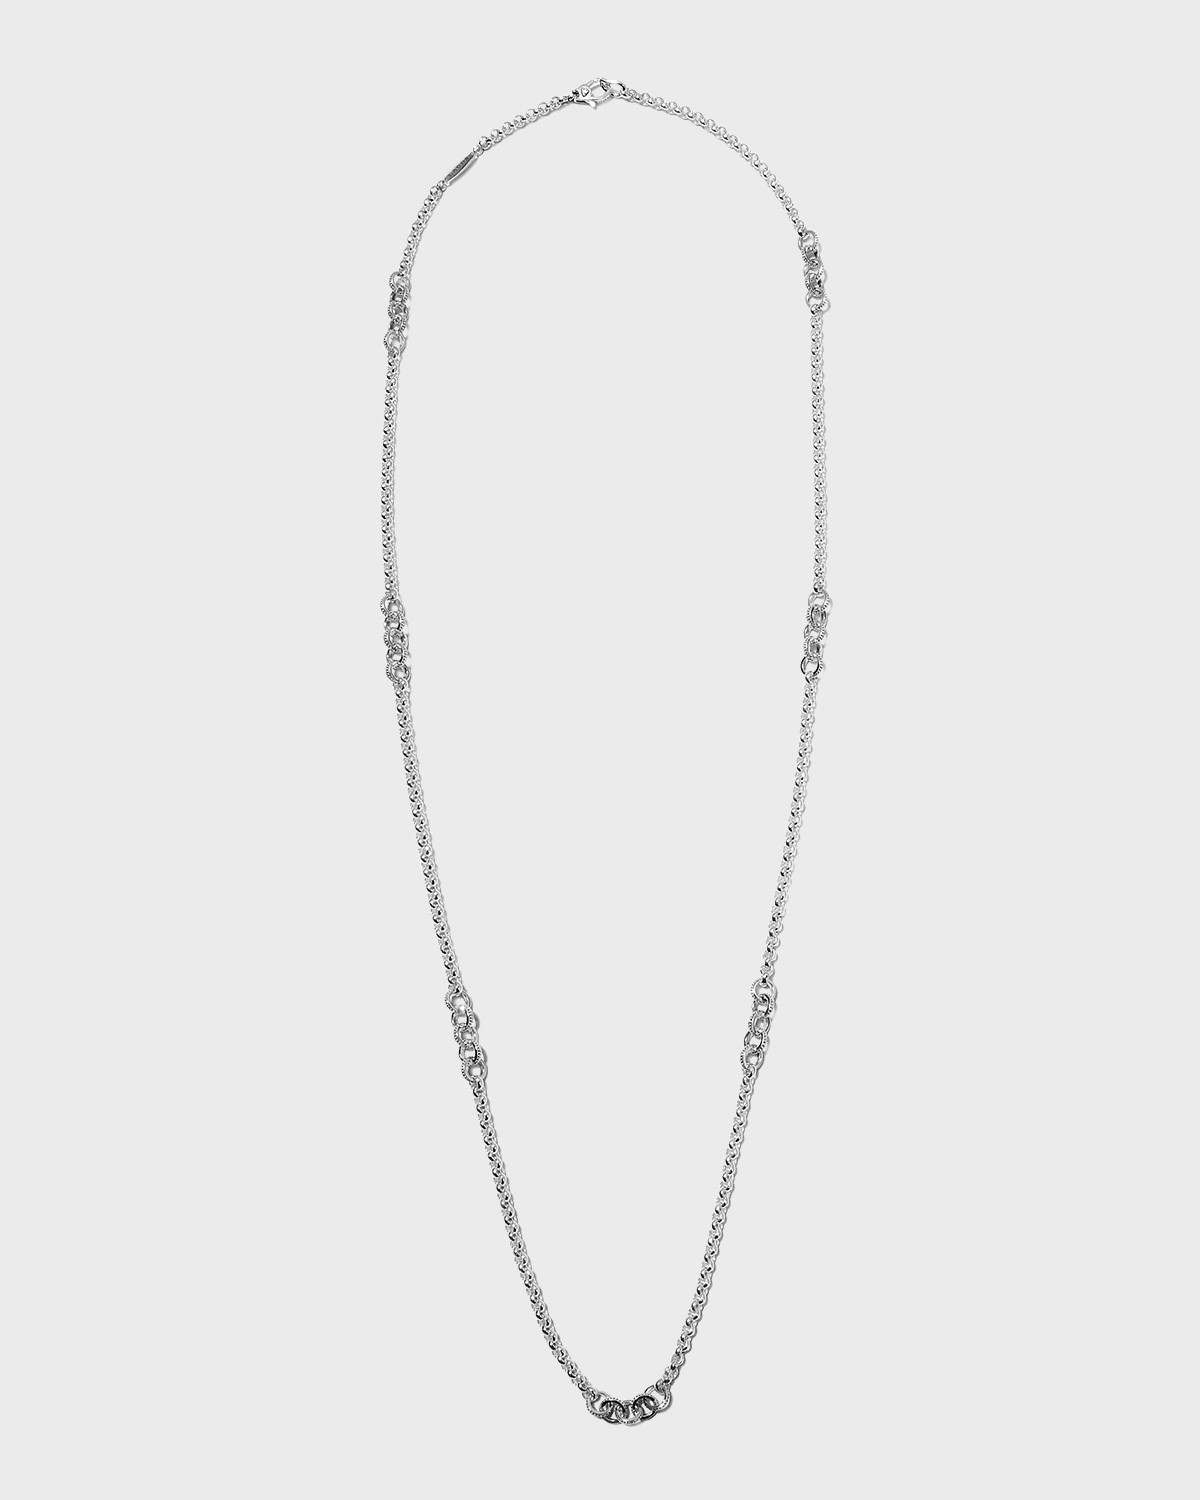 Enso 7 Circle-Station Necklace, 34"L